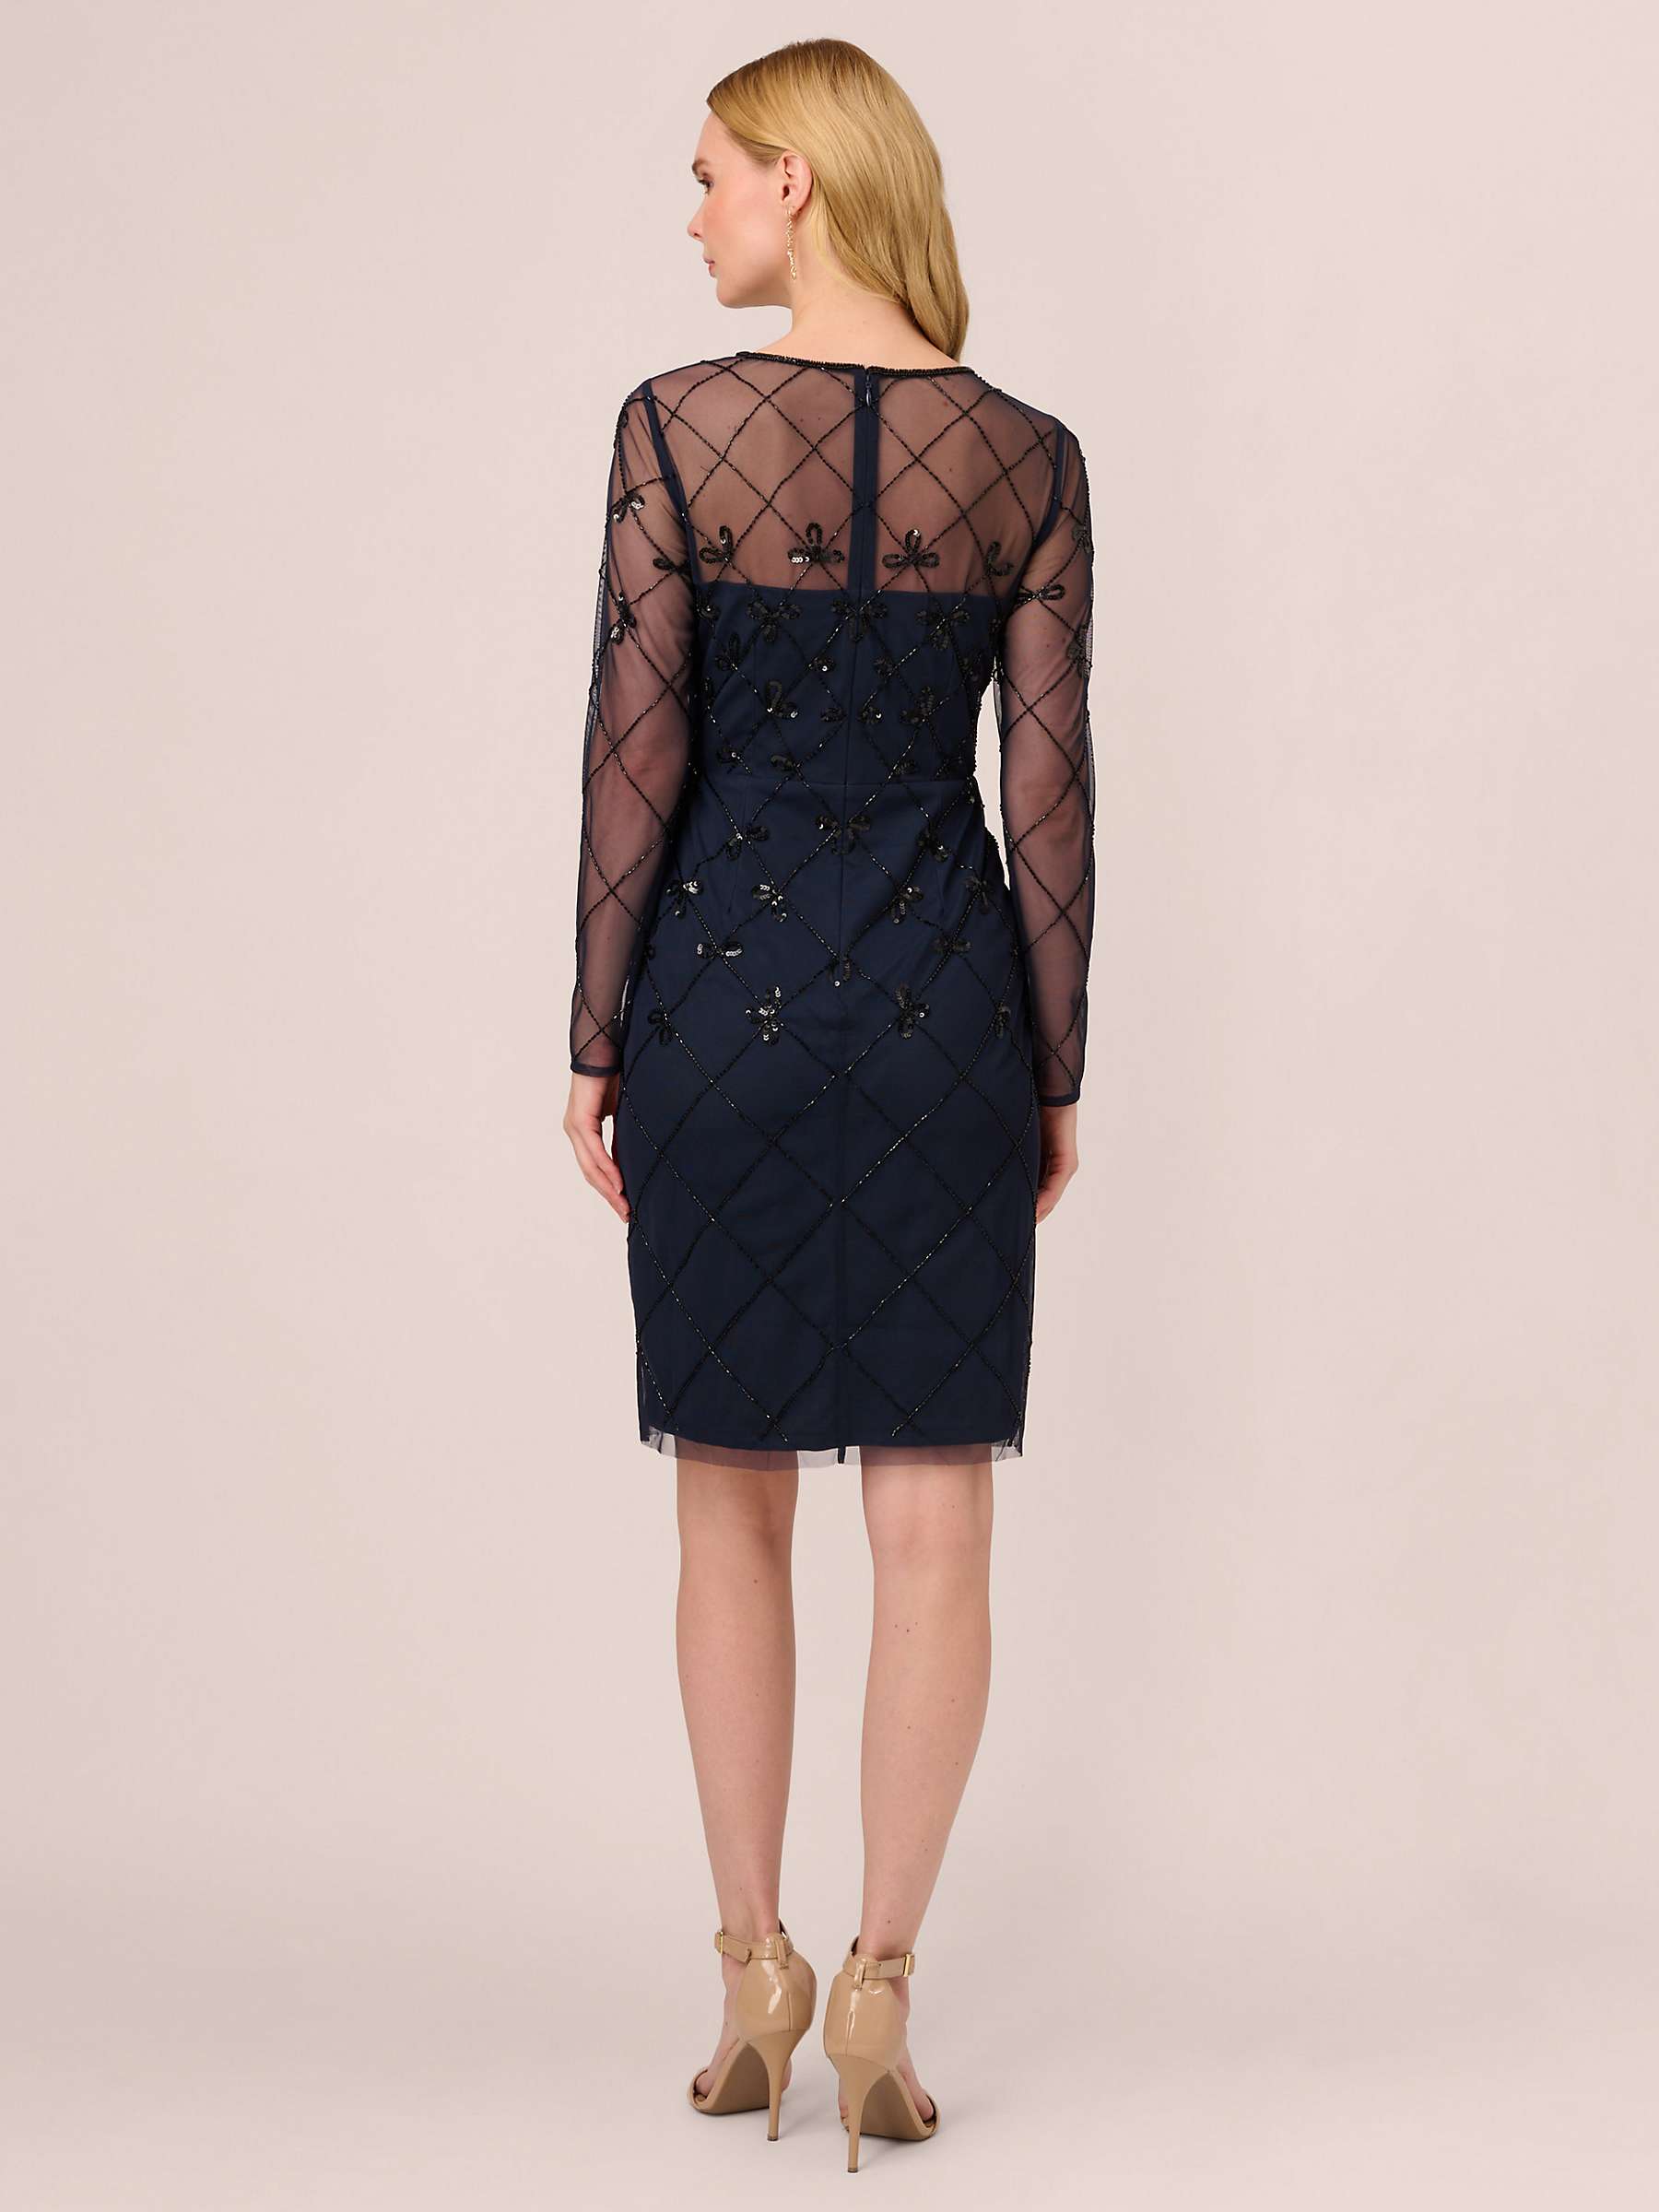 Buy Adrianna Papell Papell Studio Embellished Cocktail Dress, Navy/Black Online at johnlewis.com